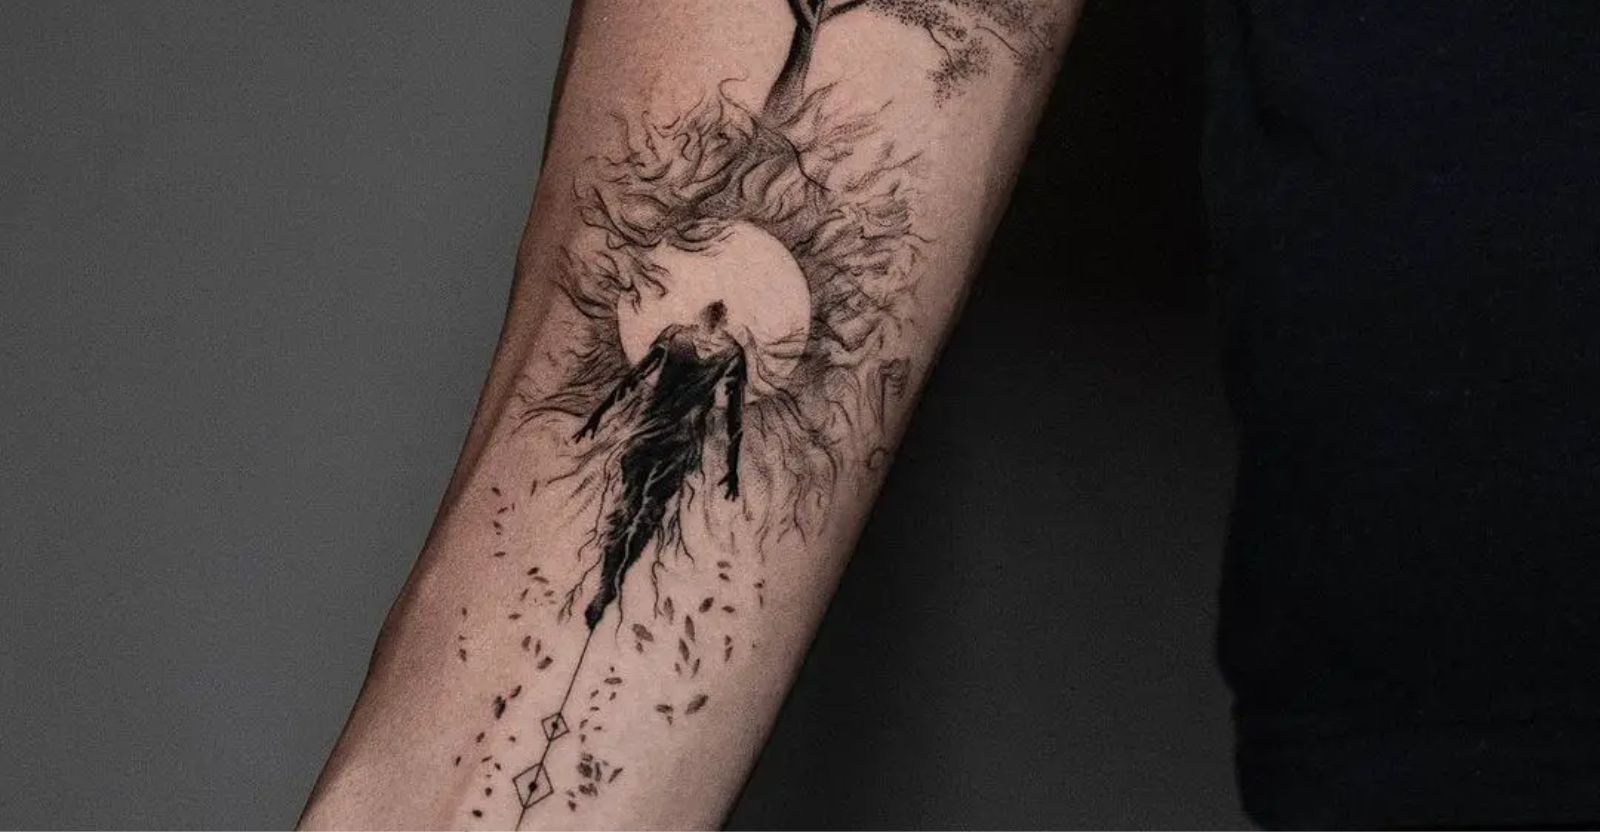 101 Amazing Nature Tattoo Ideas That Will Blow Your Mind! | Outsons | Men's  Fashion Tips And Style Guide… | Nature tattoos, Wilderness tattoo, Mother nature  tattoos